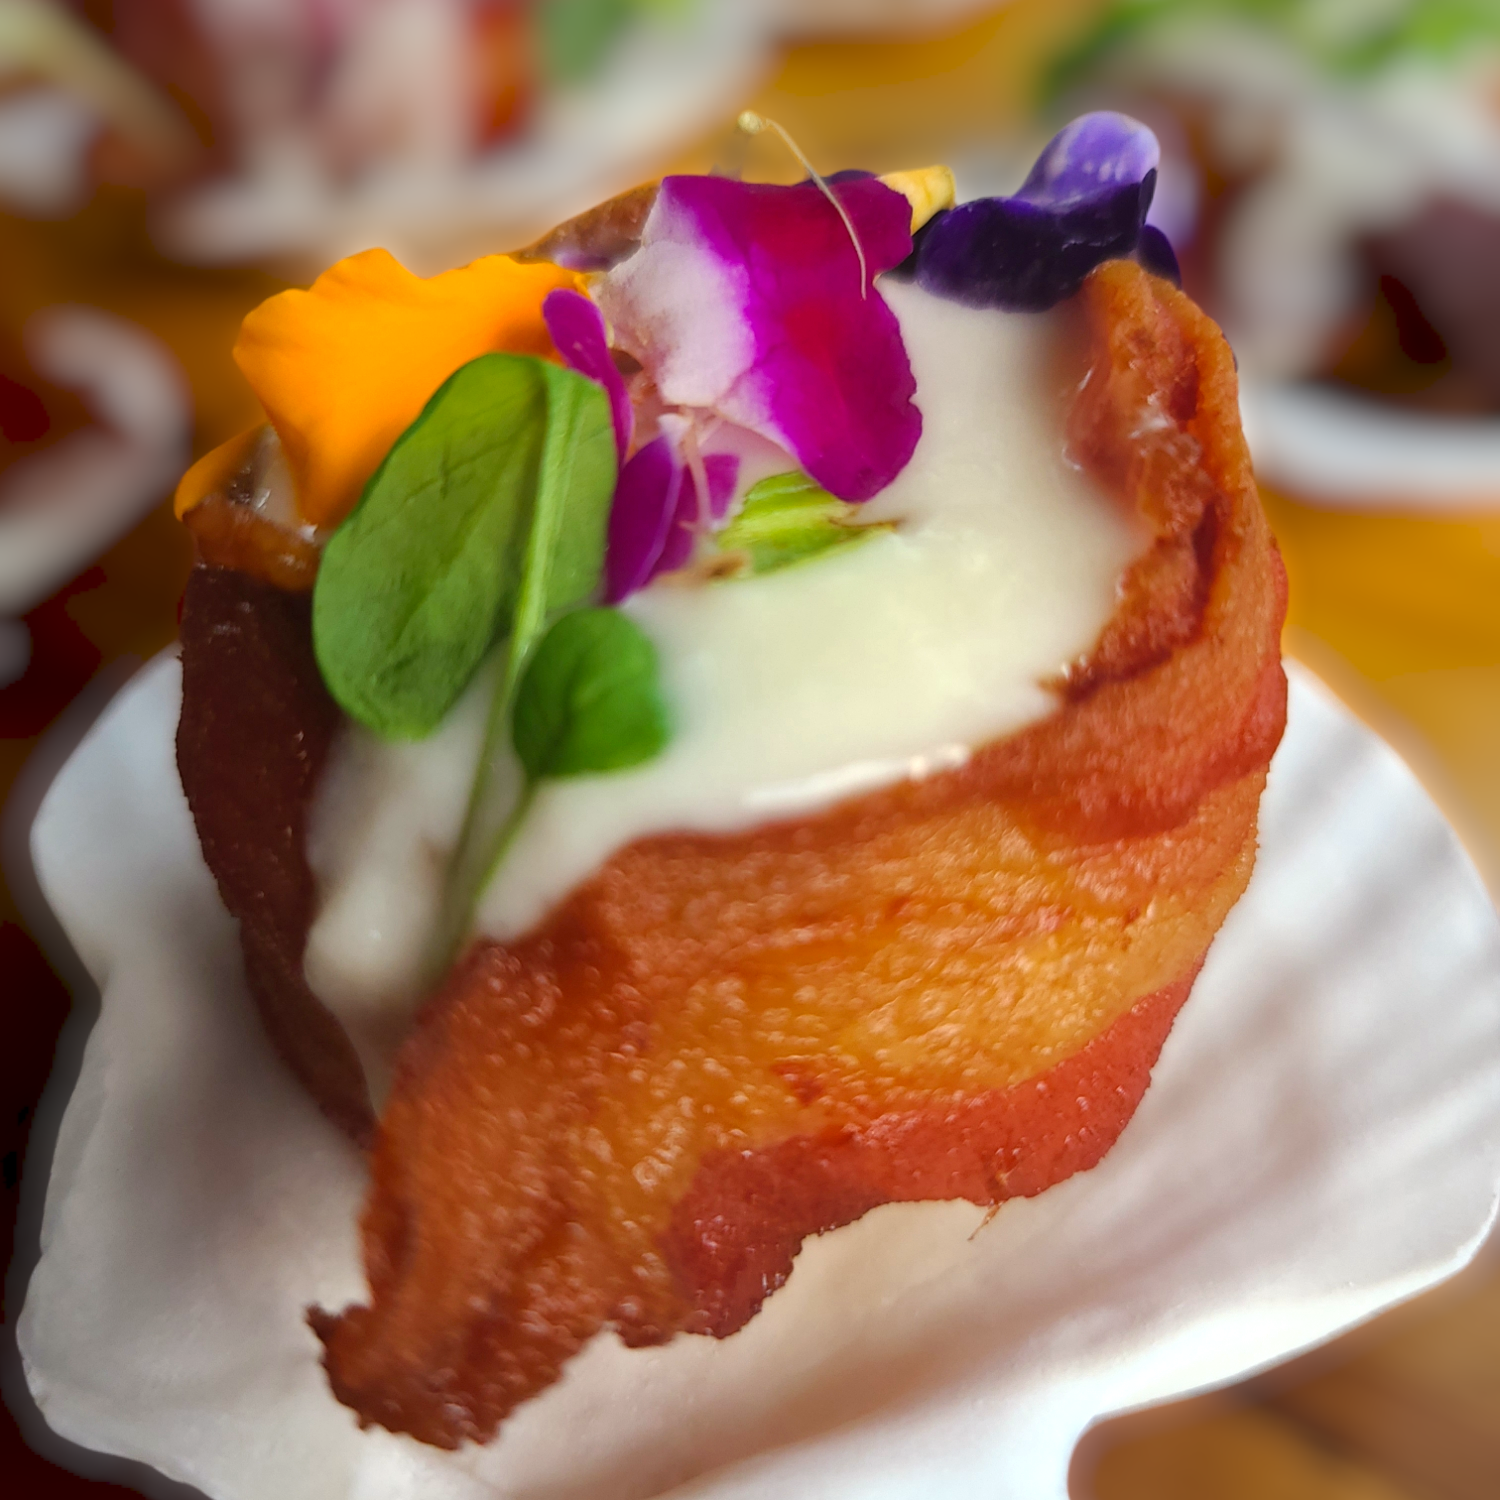 Flagler Tavern offers private event space with a full catering menu like these beautiful bacon-wrapped scallops